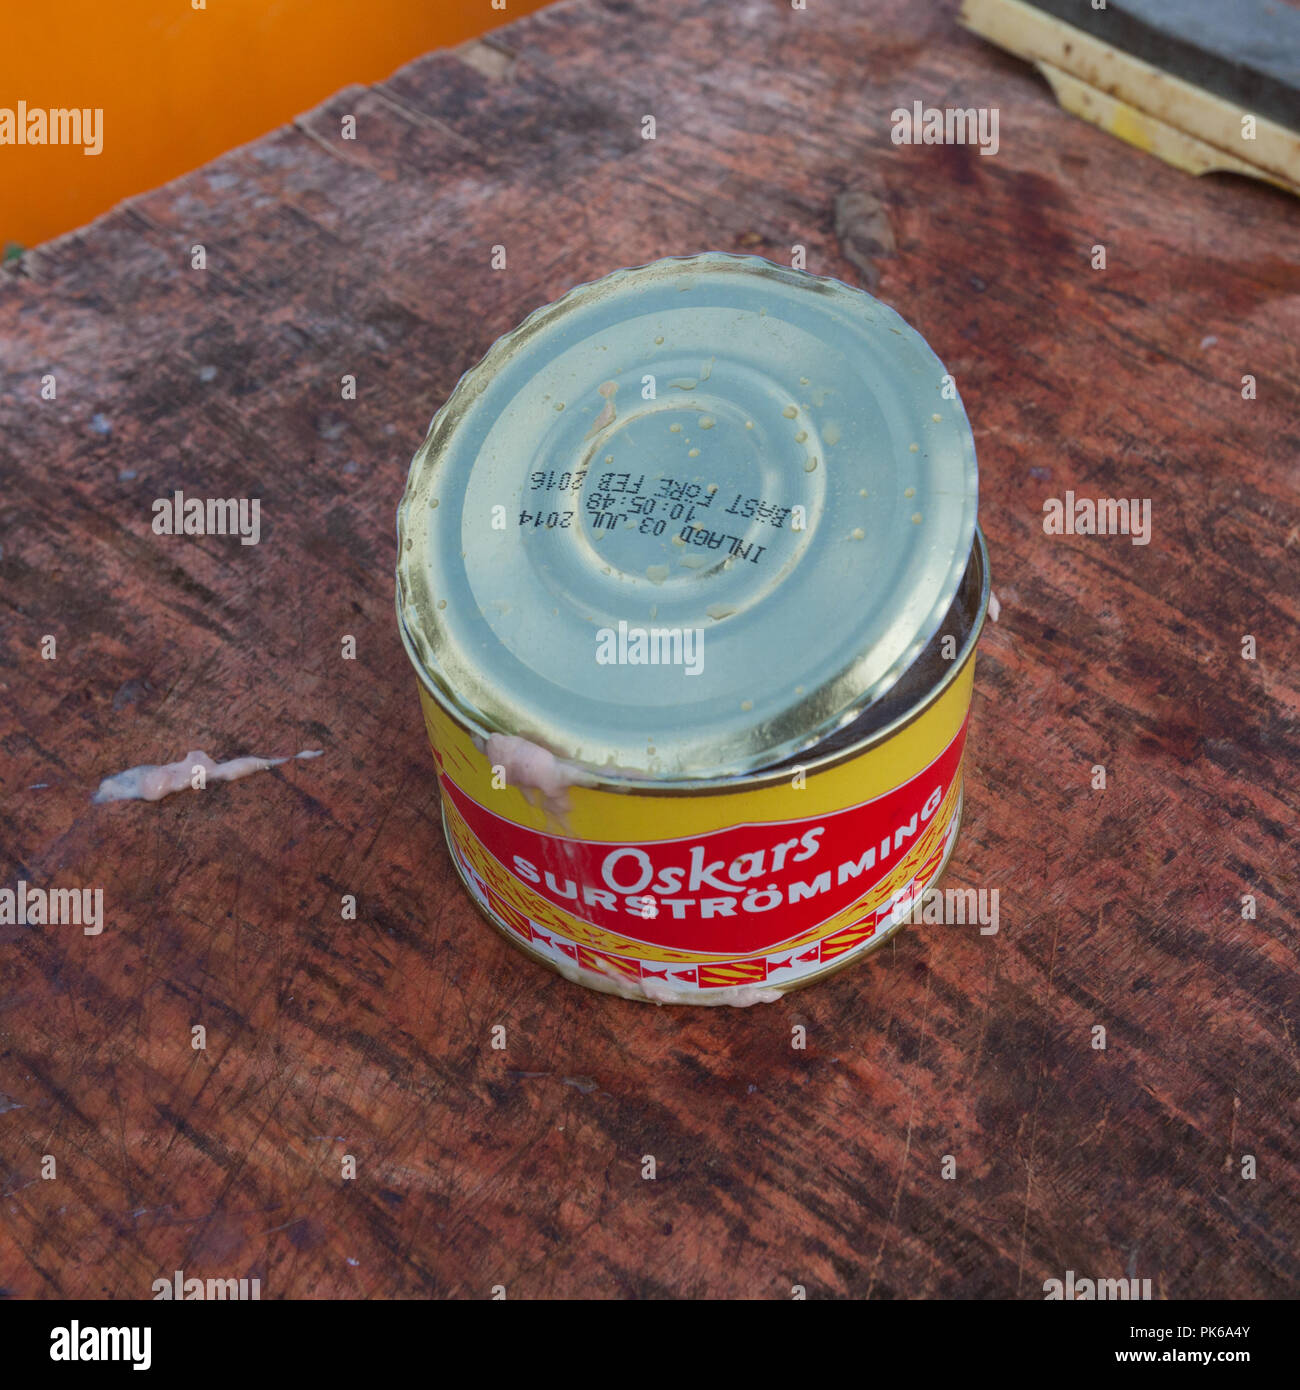 https://c8.alamy.com/comp/PK6A4Y/can-of-surstrmming-is-fermented-baltic-sea-herring-often-described-as-the-worst-smelling-food-in-the-world-PK6A4Y.jpg